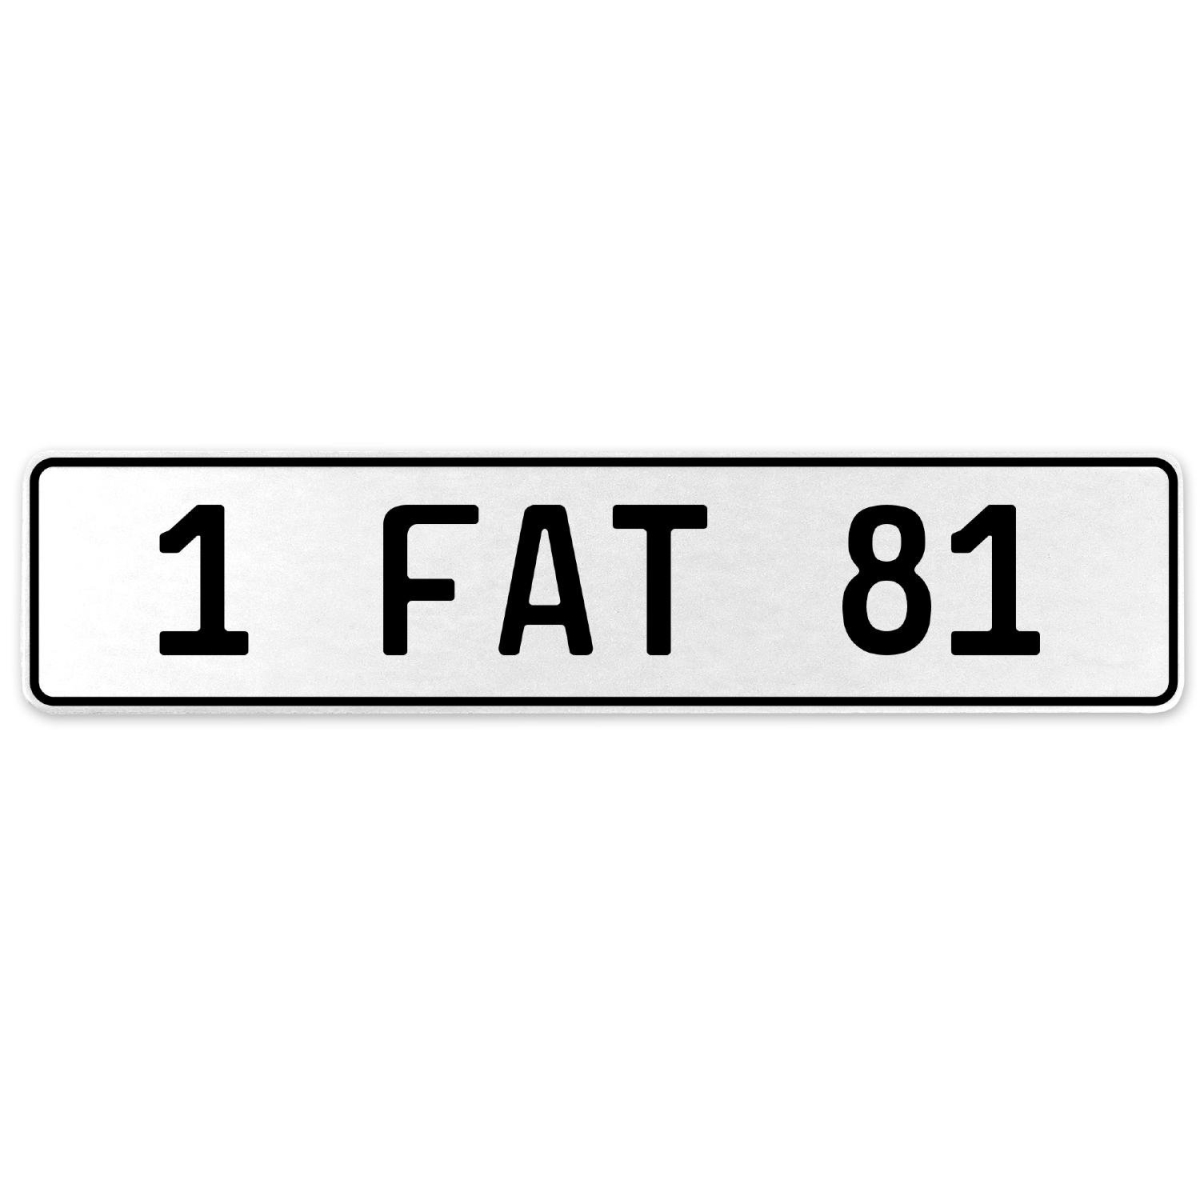 554678 1 Fat 81 - White Aluminum Street Sign Mancave Euro Plate Name Door Sign Wall